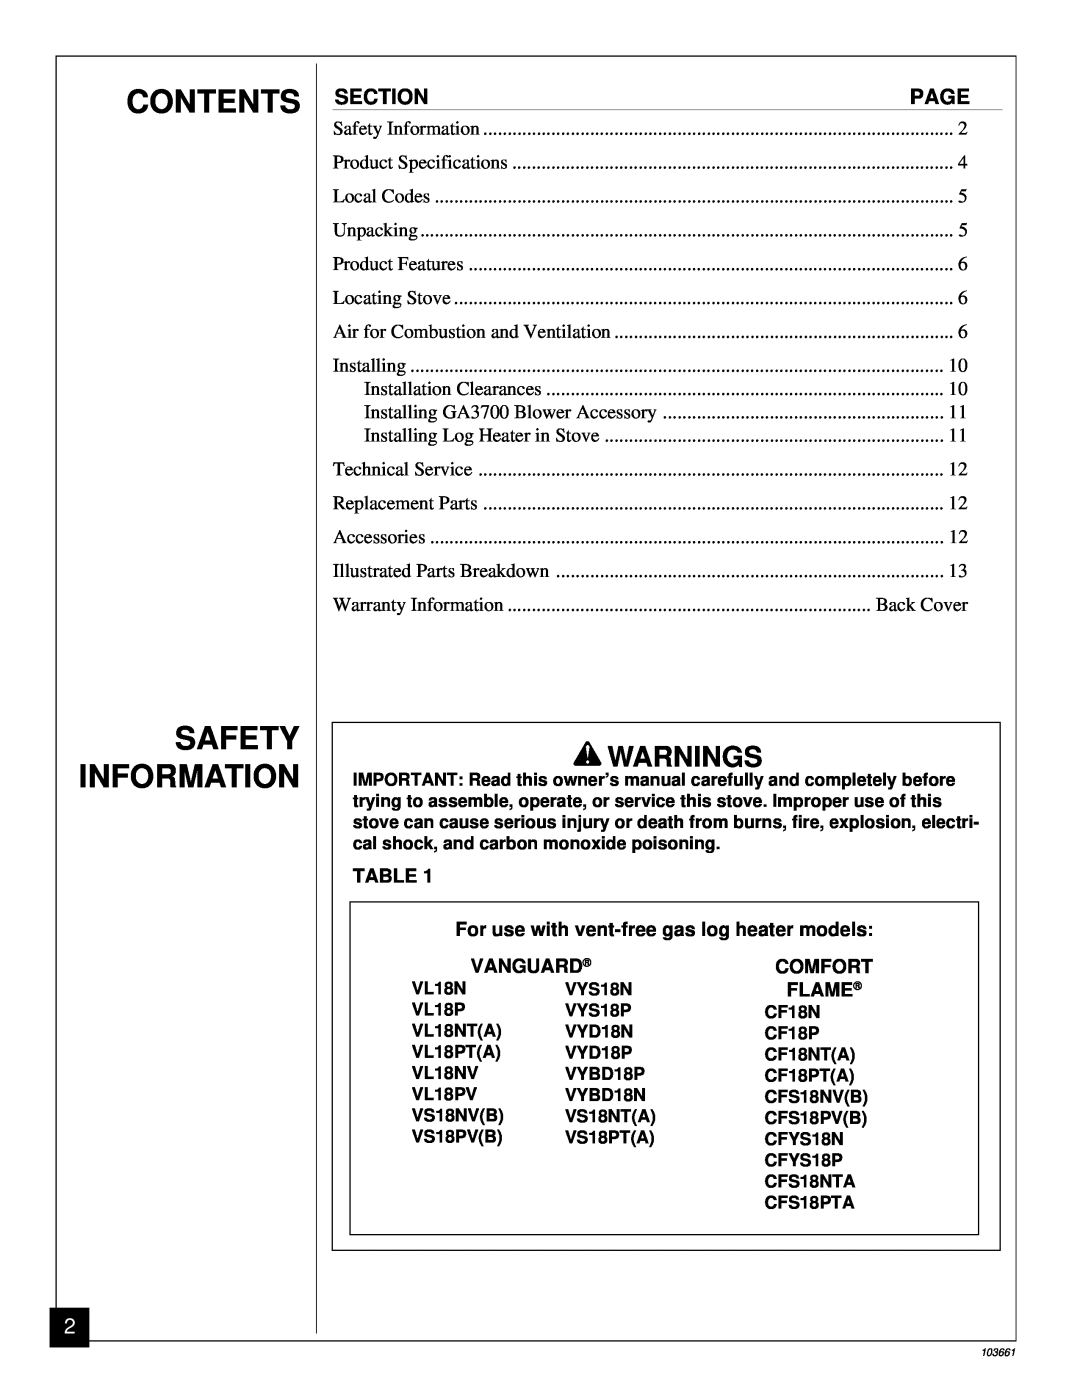 Vanguard Managed Solutions SVFBC installation manual Contents Safety Information, Warnings 